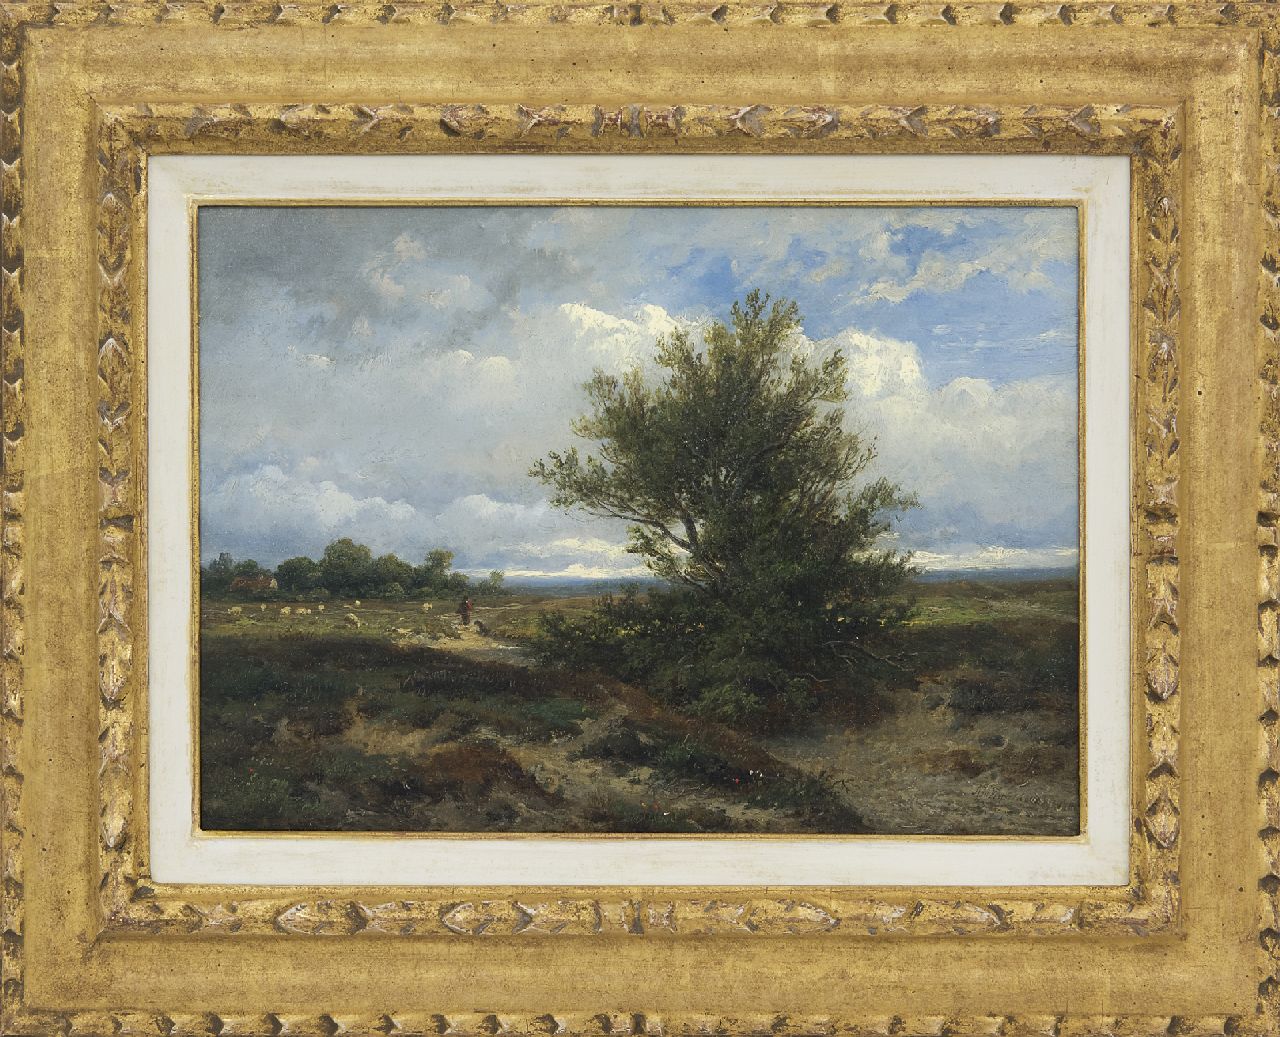 Wijngaerdt A.J. van | Anthonie Jacobus van Wijngaerdt | Paintings offered for sale | A landscape with shepherd and his flock, oil on panel 22.3 x 31.0 cm, signed l.r. and dated 1865